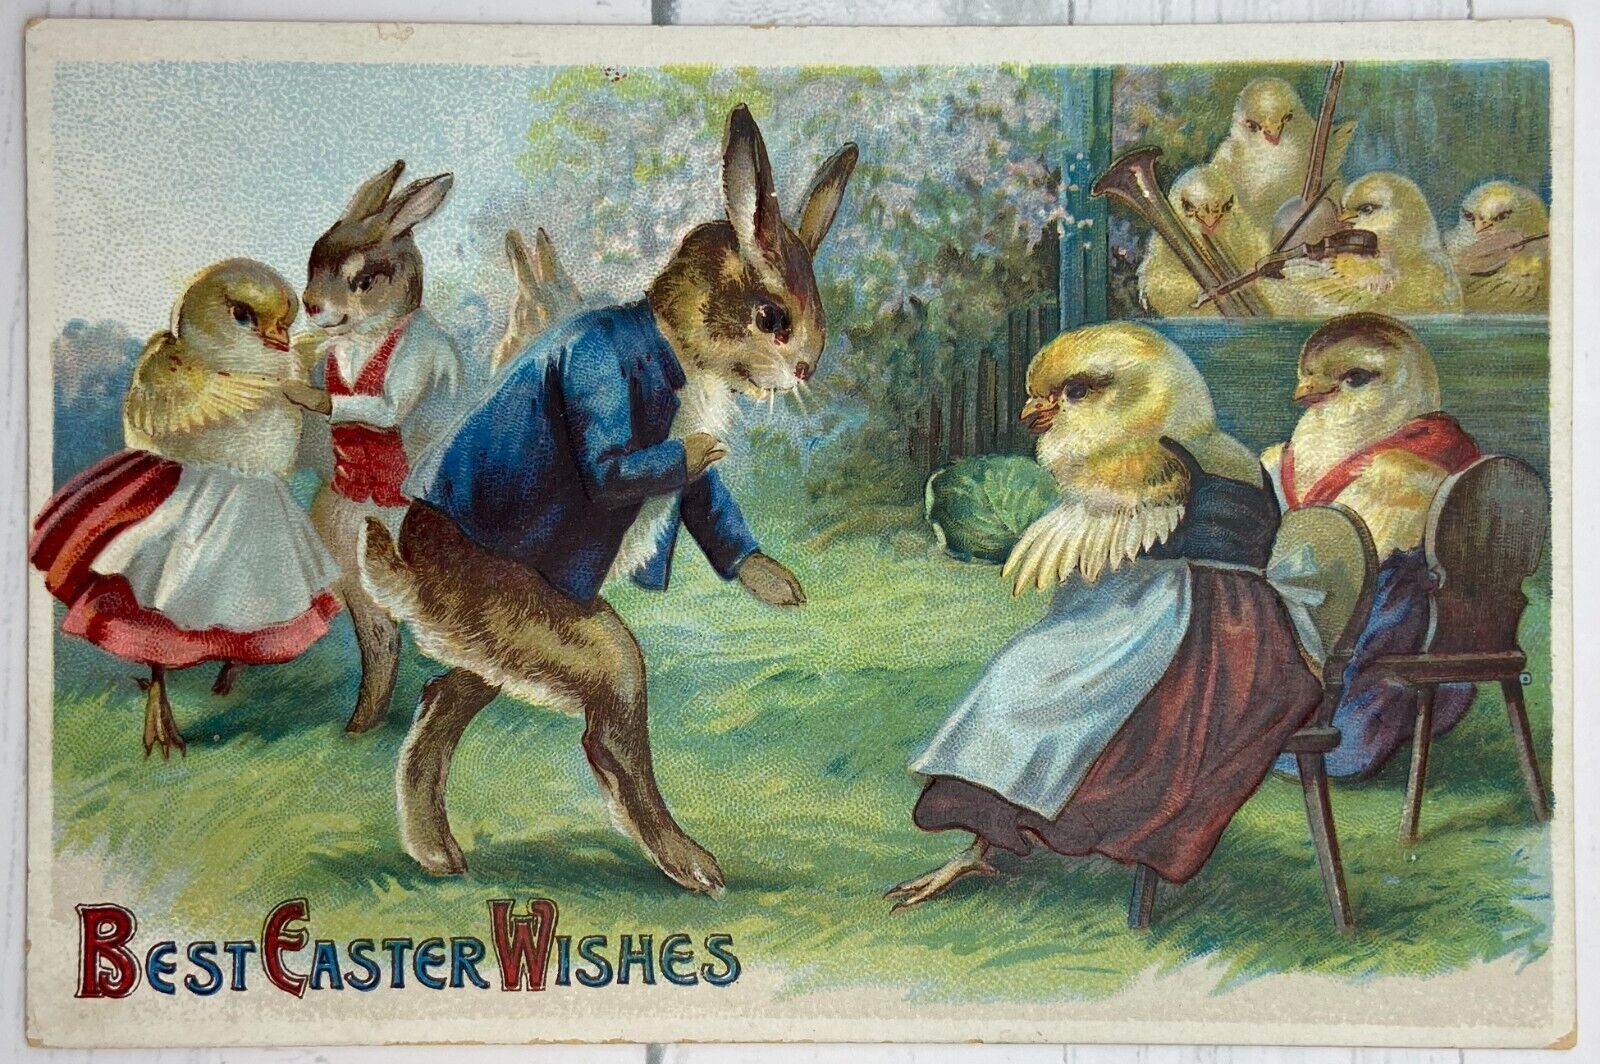 Vintage Postcard Best Easter Wishes ~ Anthropomorphic Rabbits and Chicks